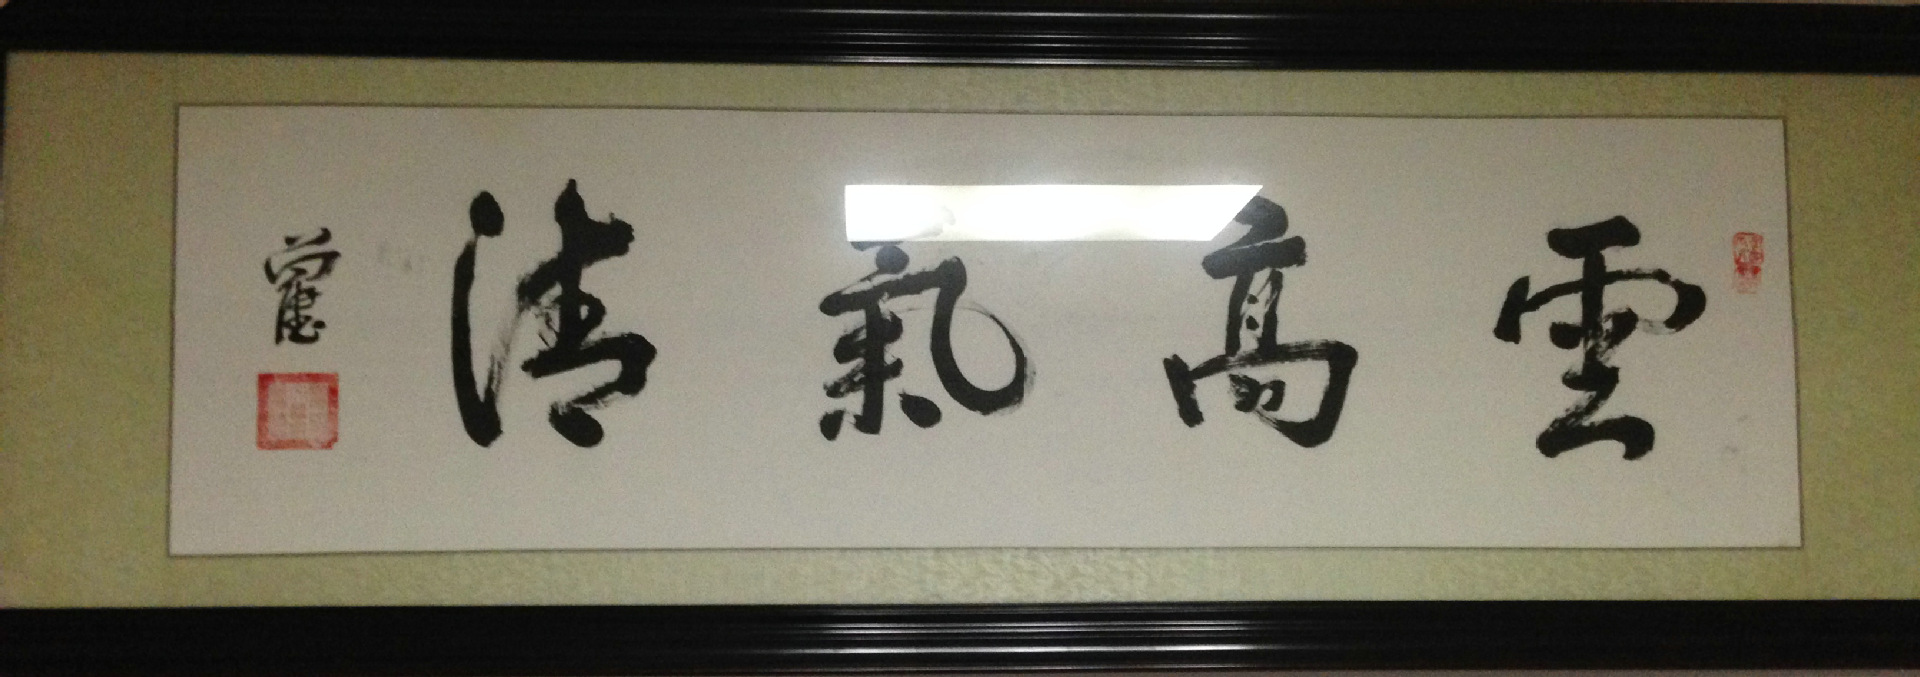 calligraphy had Guangde together and... US $43,548.39 / piece